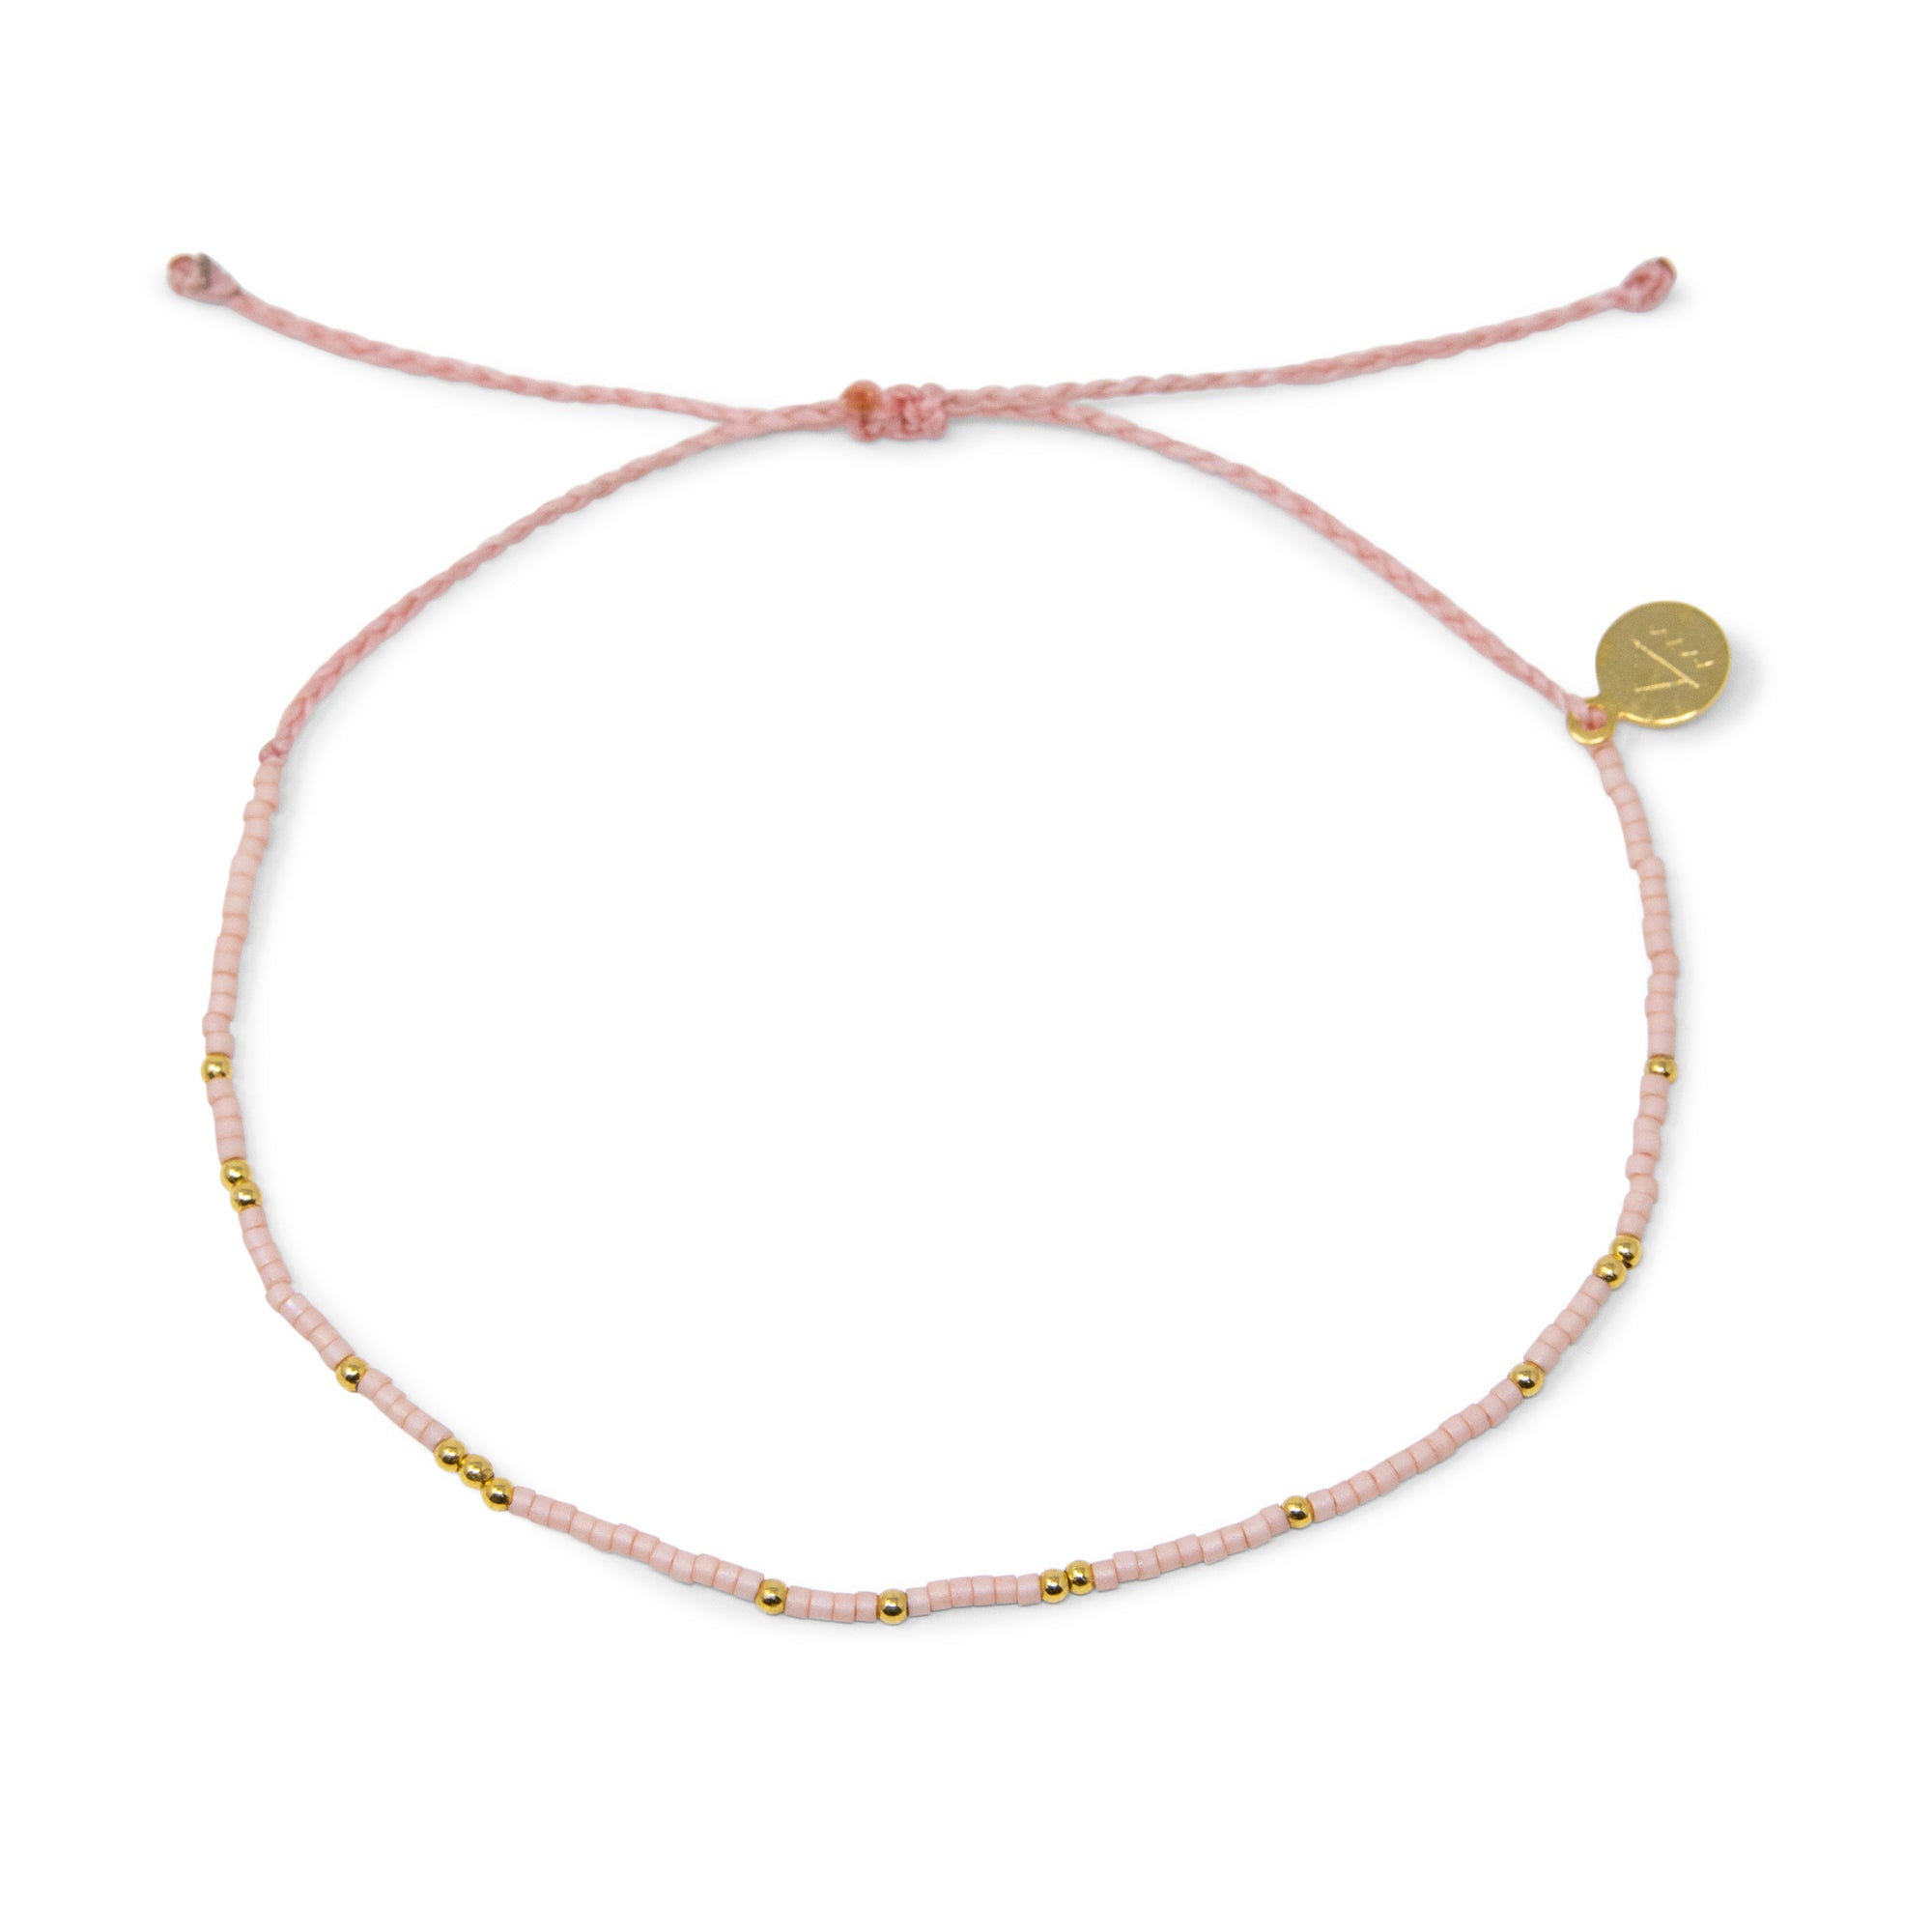 Coral & Gold Bead Anklet